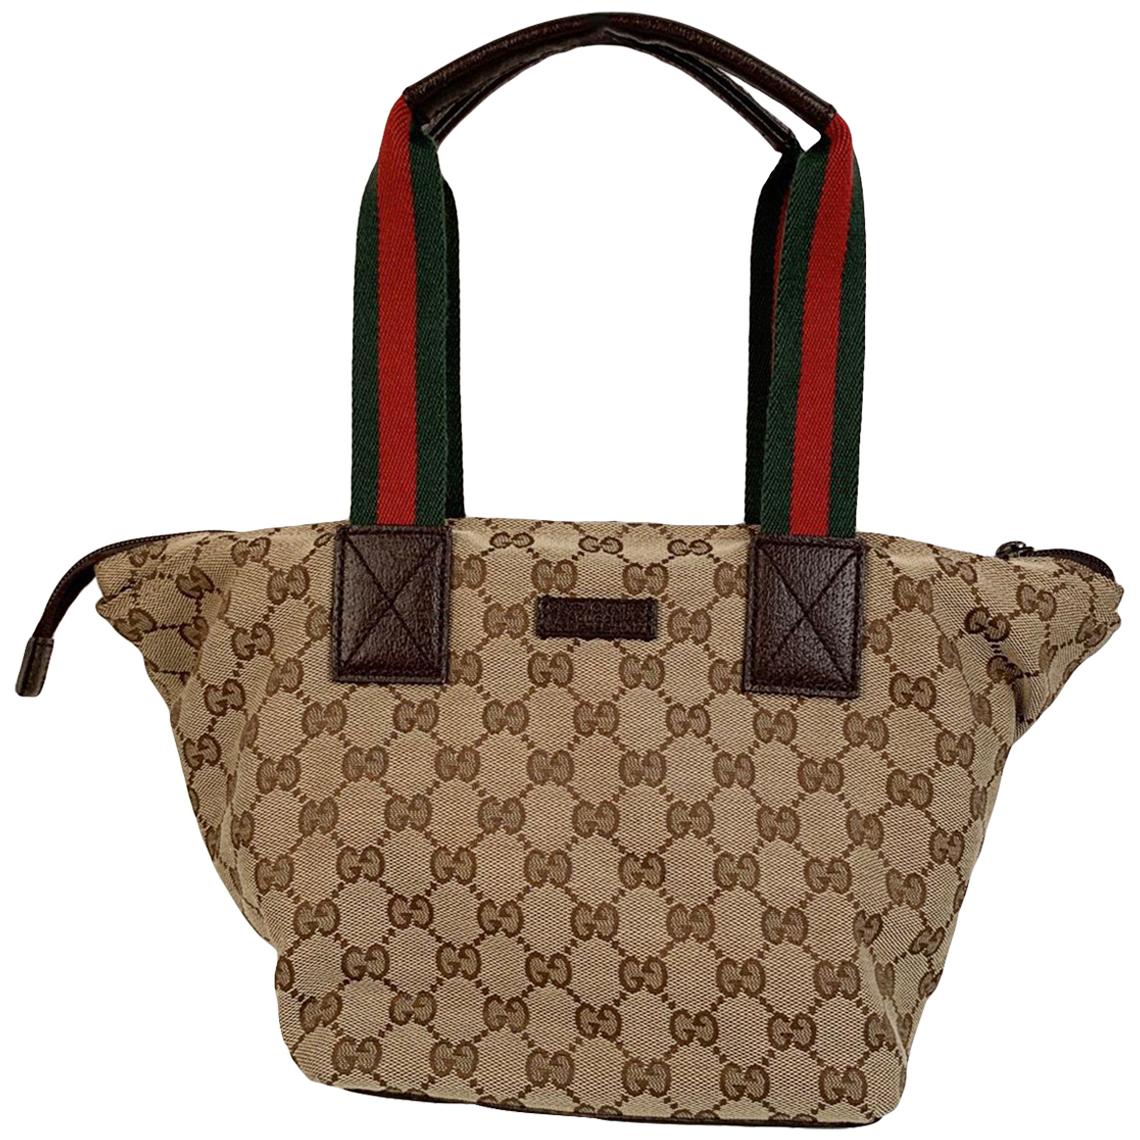 Gucci Beige Monogram Canvas Small Tote Bag with Web Handles